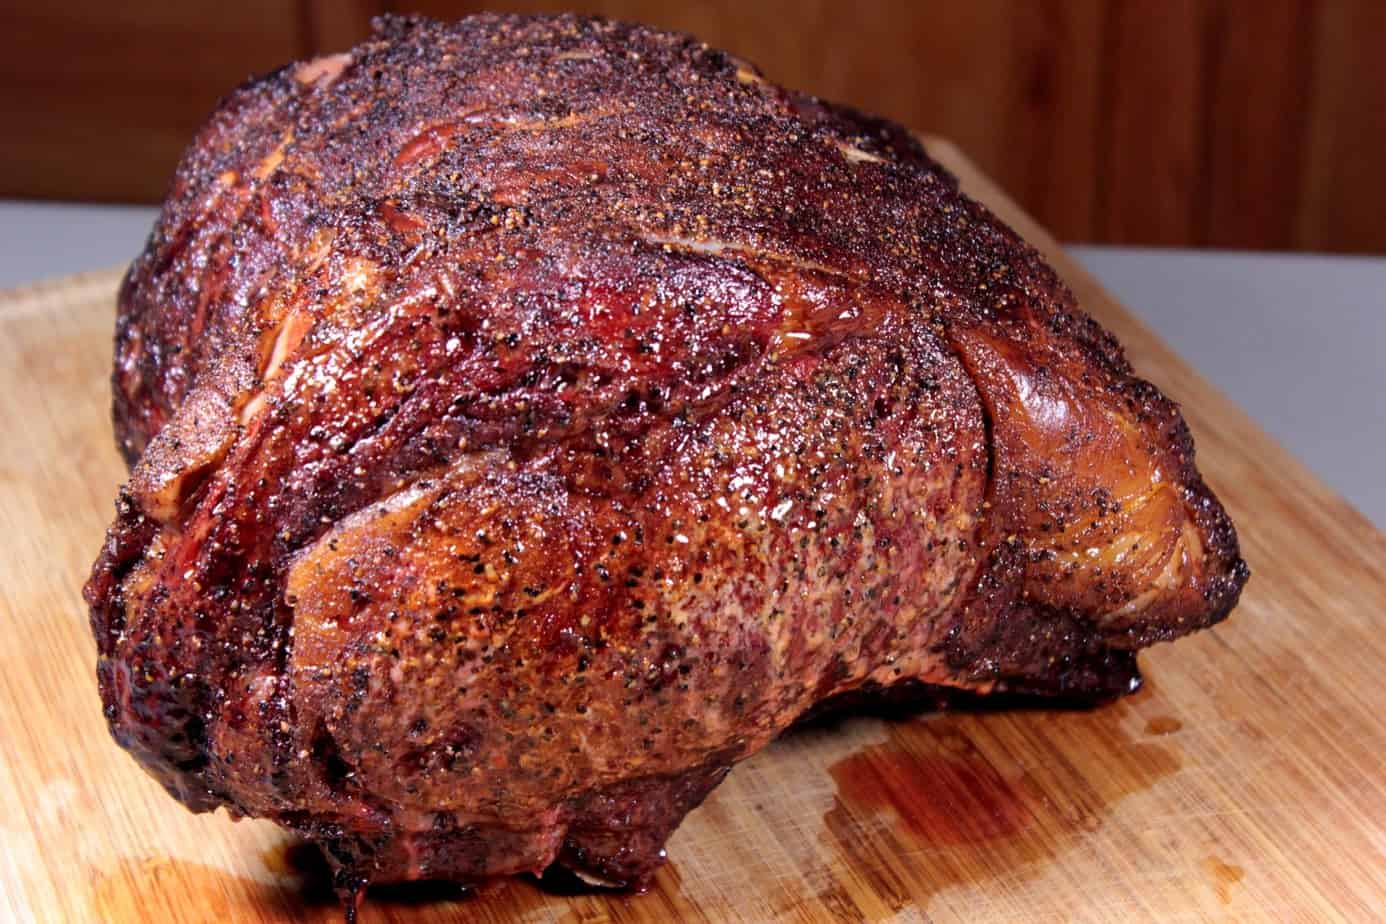 Smoked Prime Rib For Christmas Smoking Meat Newsletter,12 Cup In Ml